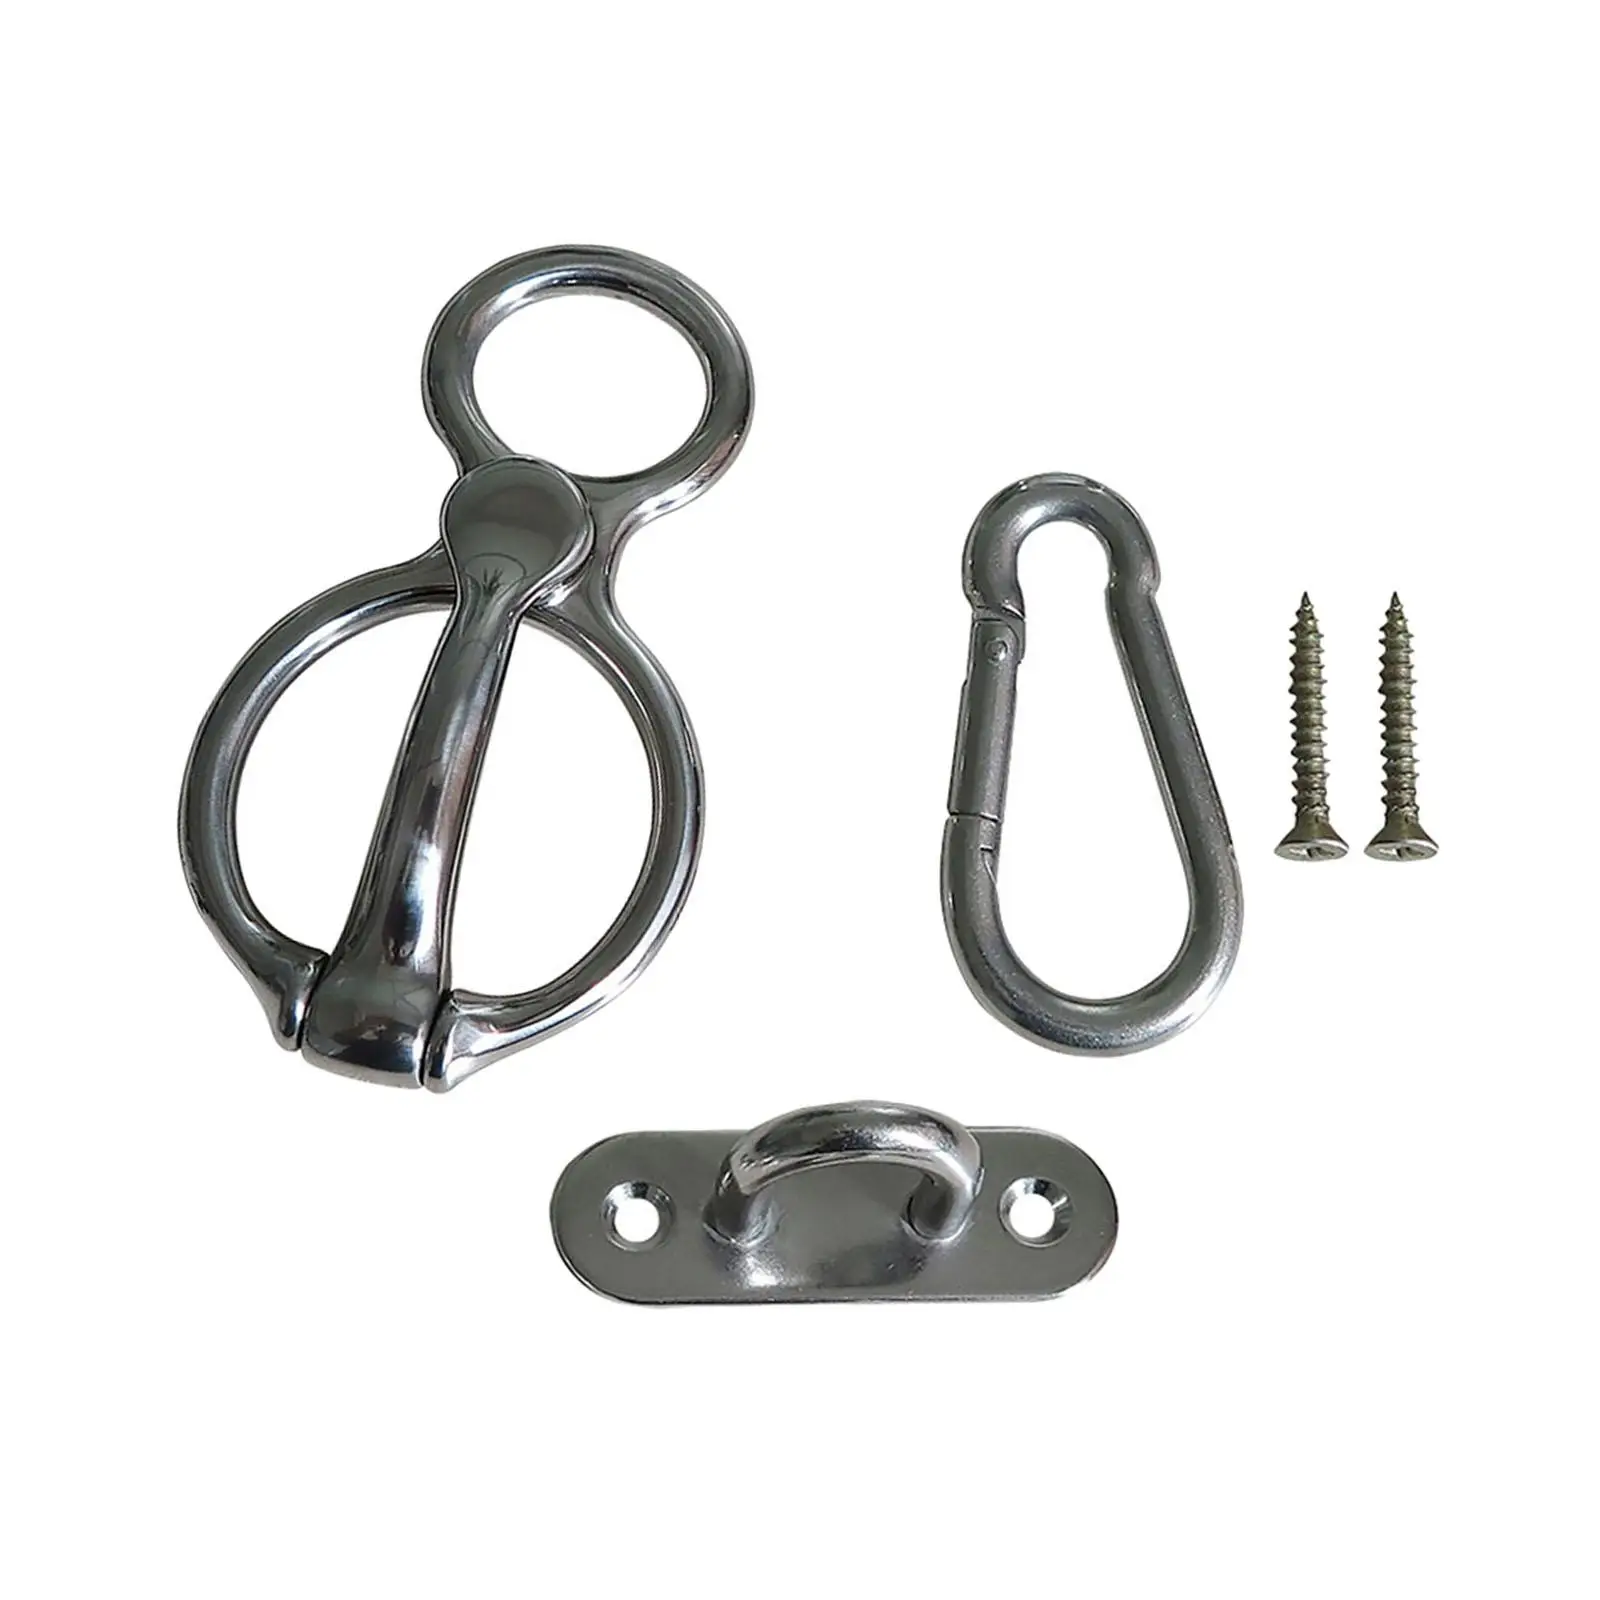 Horse Tie Ring Fasteners Outdoor Sports Equestrian Durable Hooks Stable Accessories Horse Tack Supplies Training Equipment